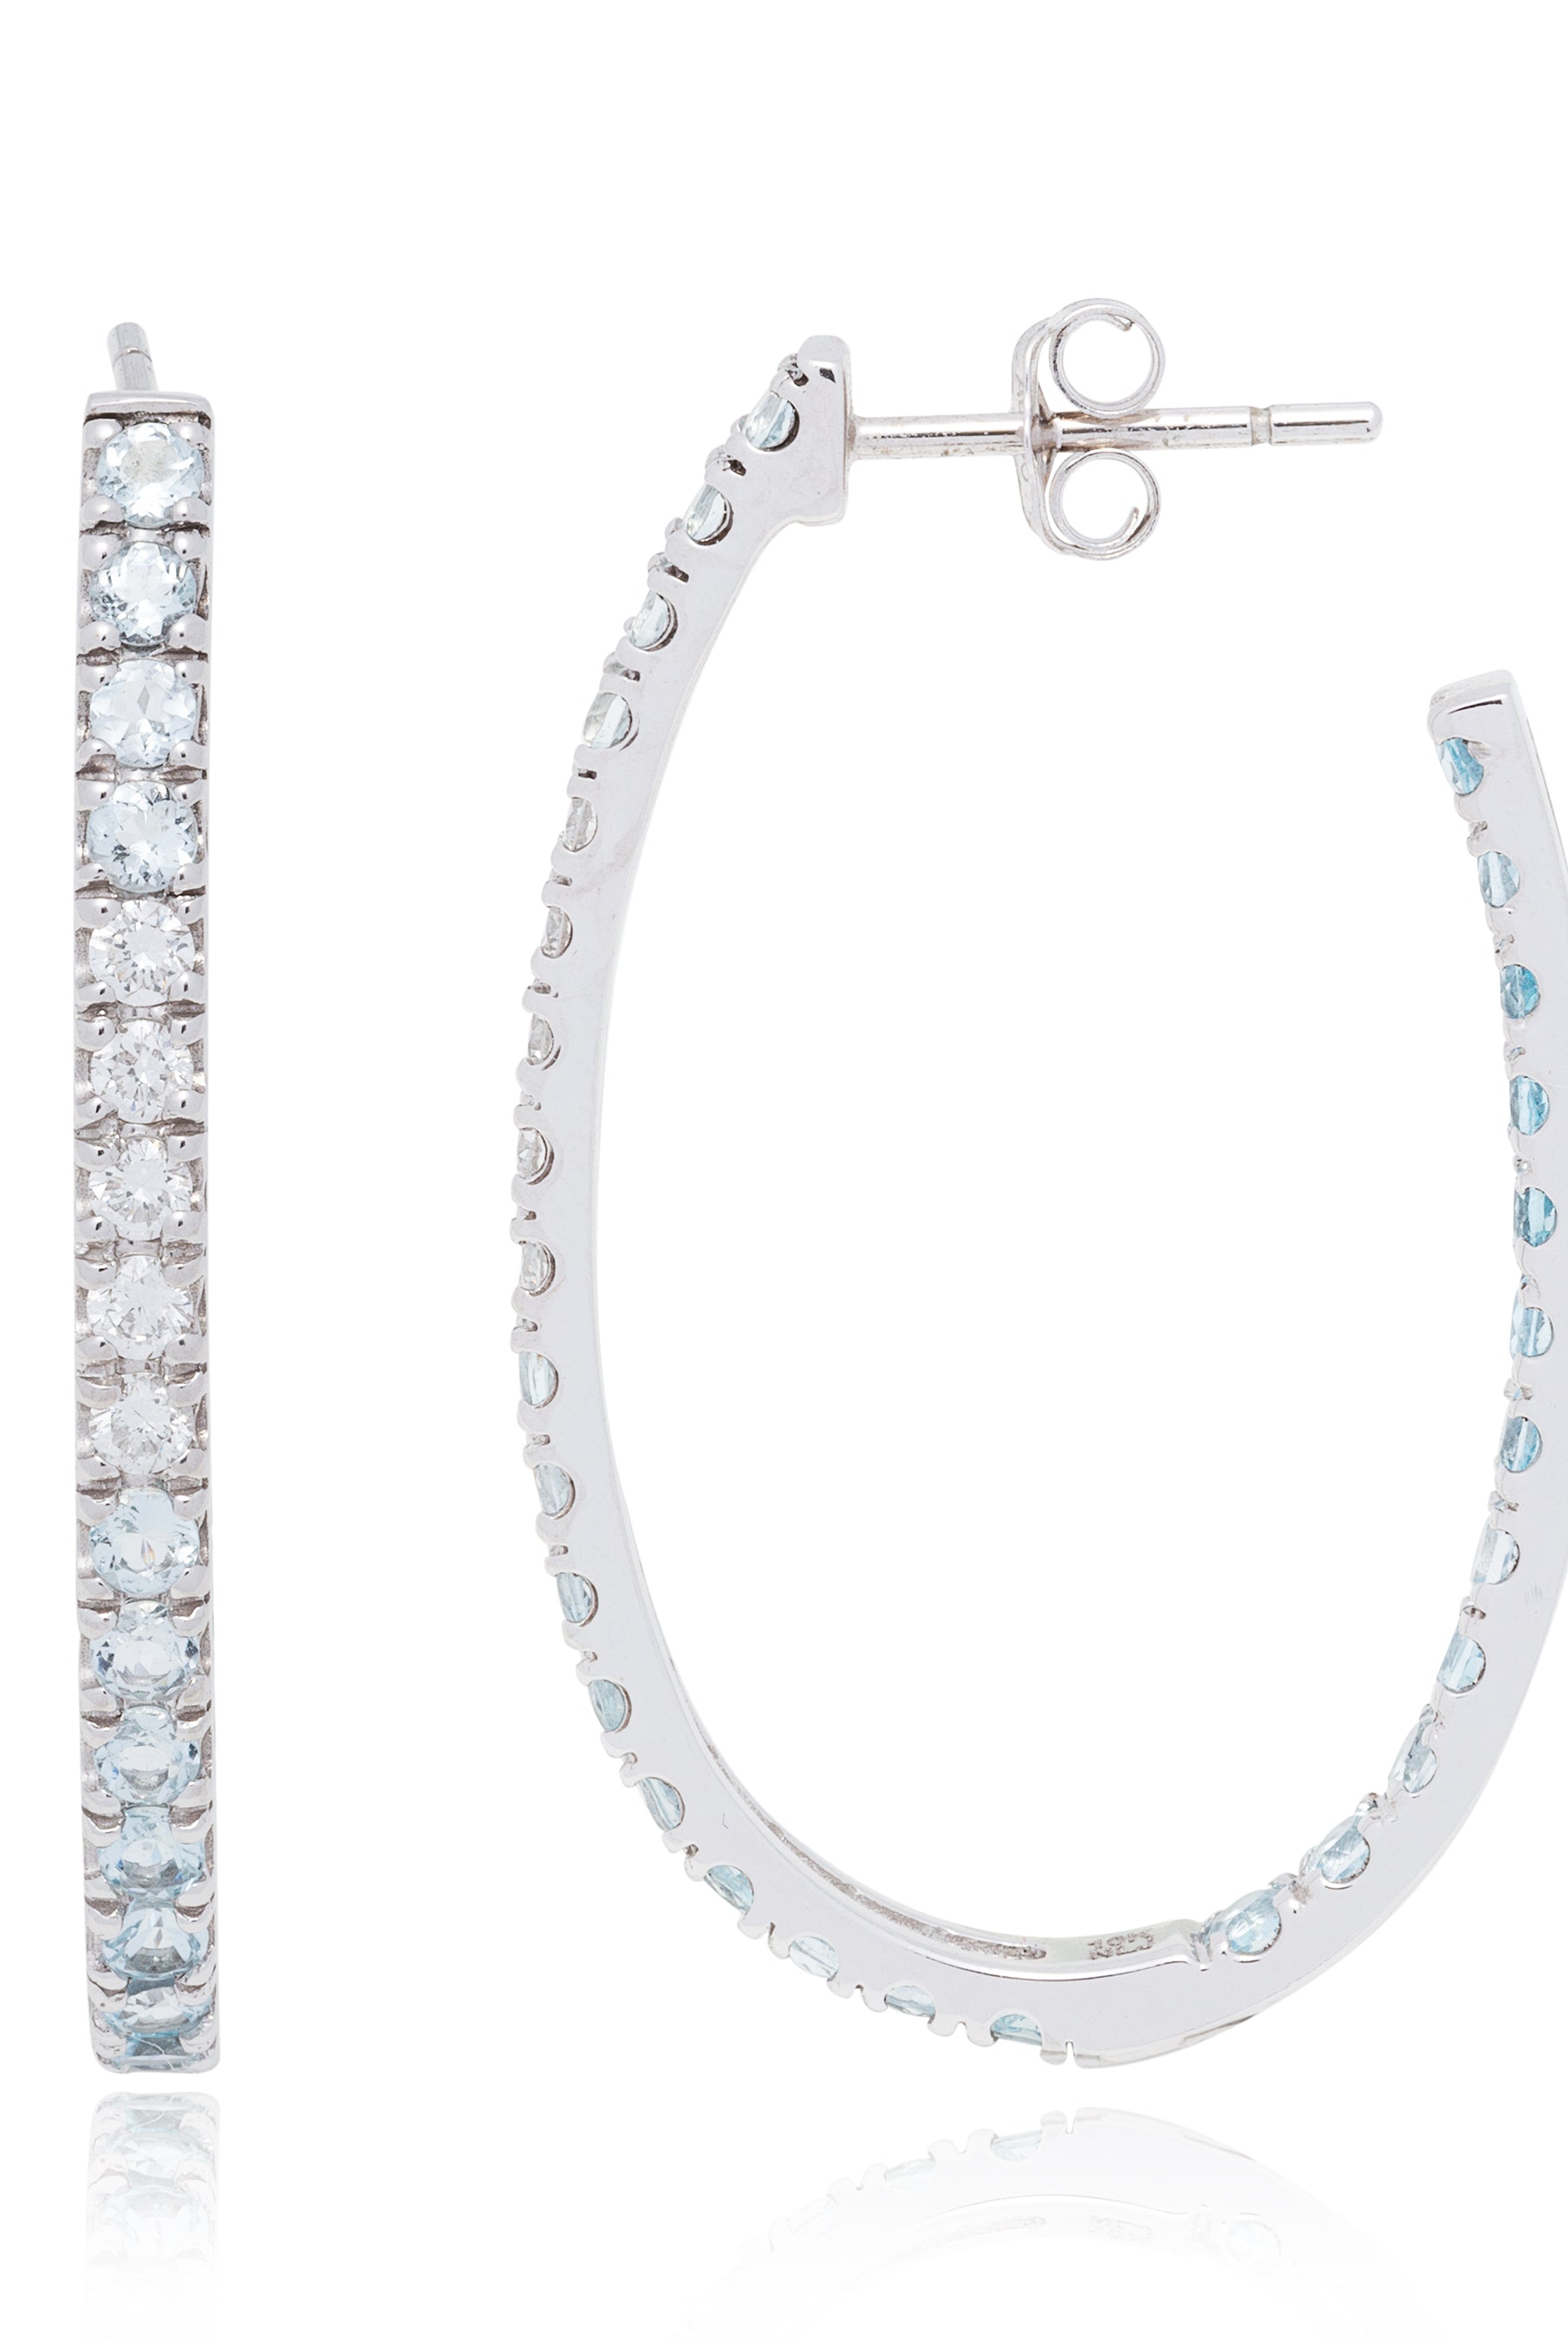 Pop aquamarine and diamond hoop earrings, 10K rhodium plated solid white gold. Our quintessential diamond hoops with a fabulous twist! International shipping available.